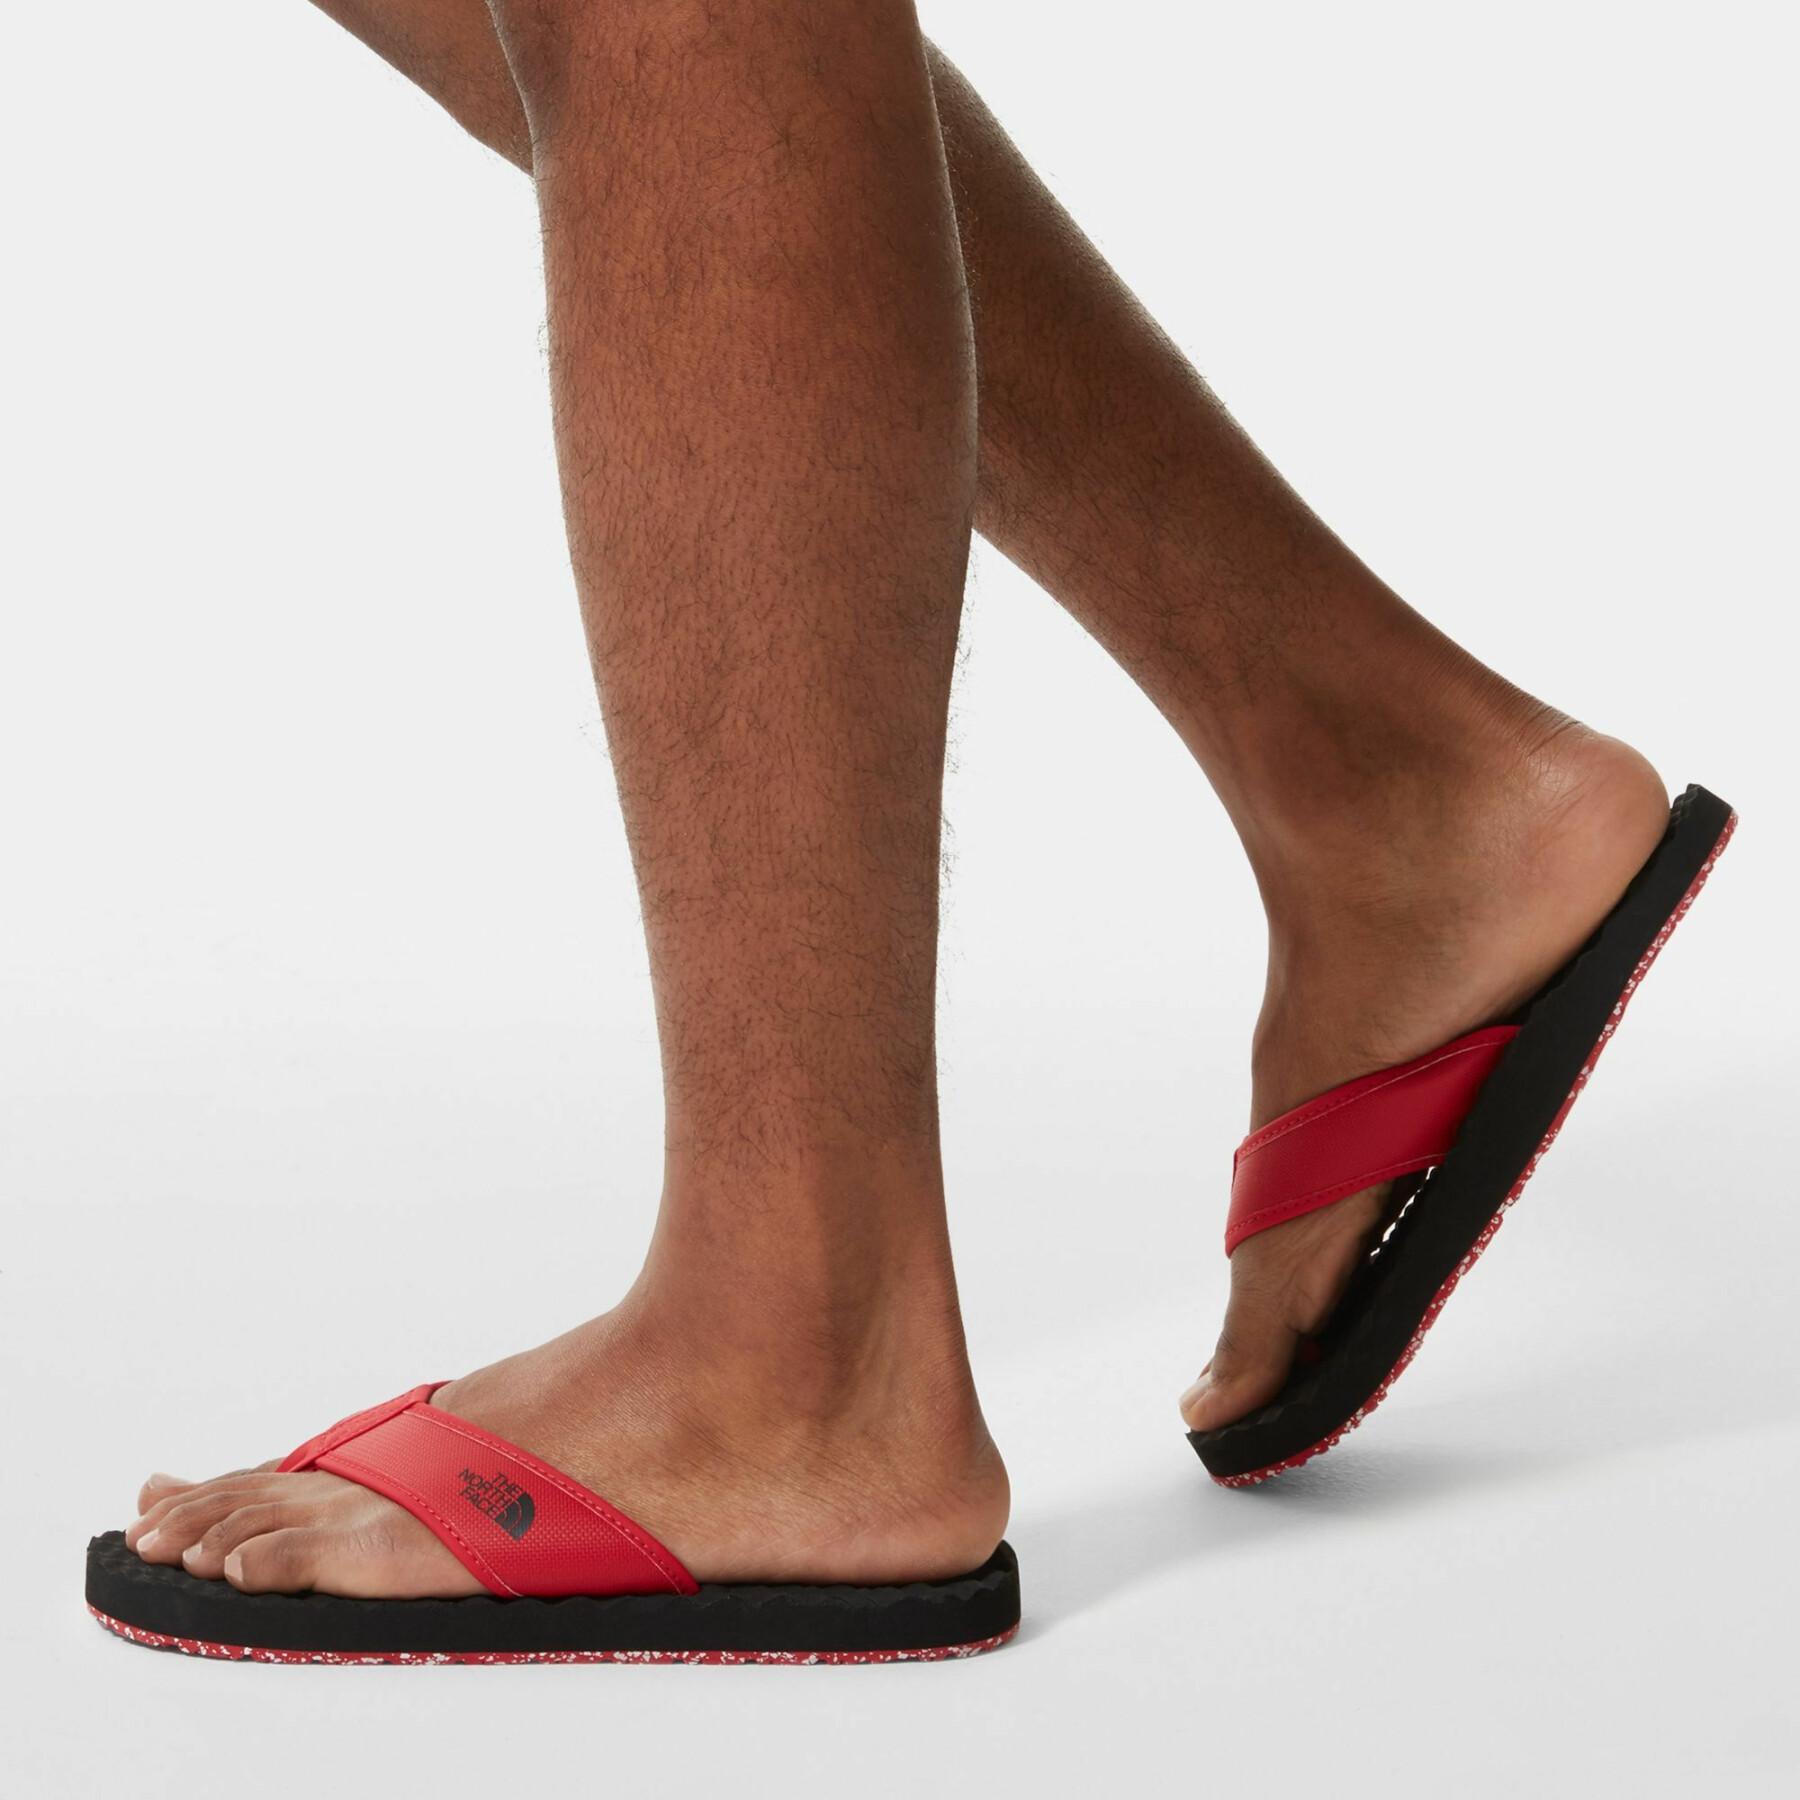 Chanclas The North Face Base Camp Flip-Flop II